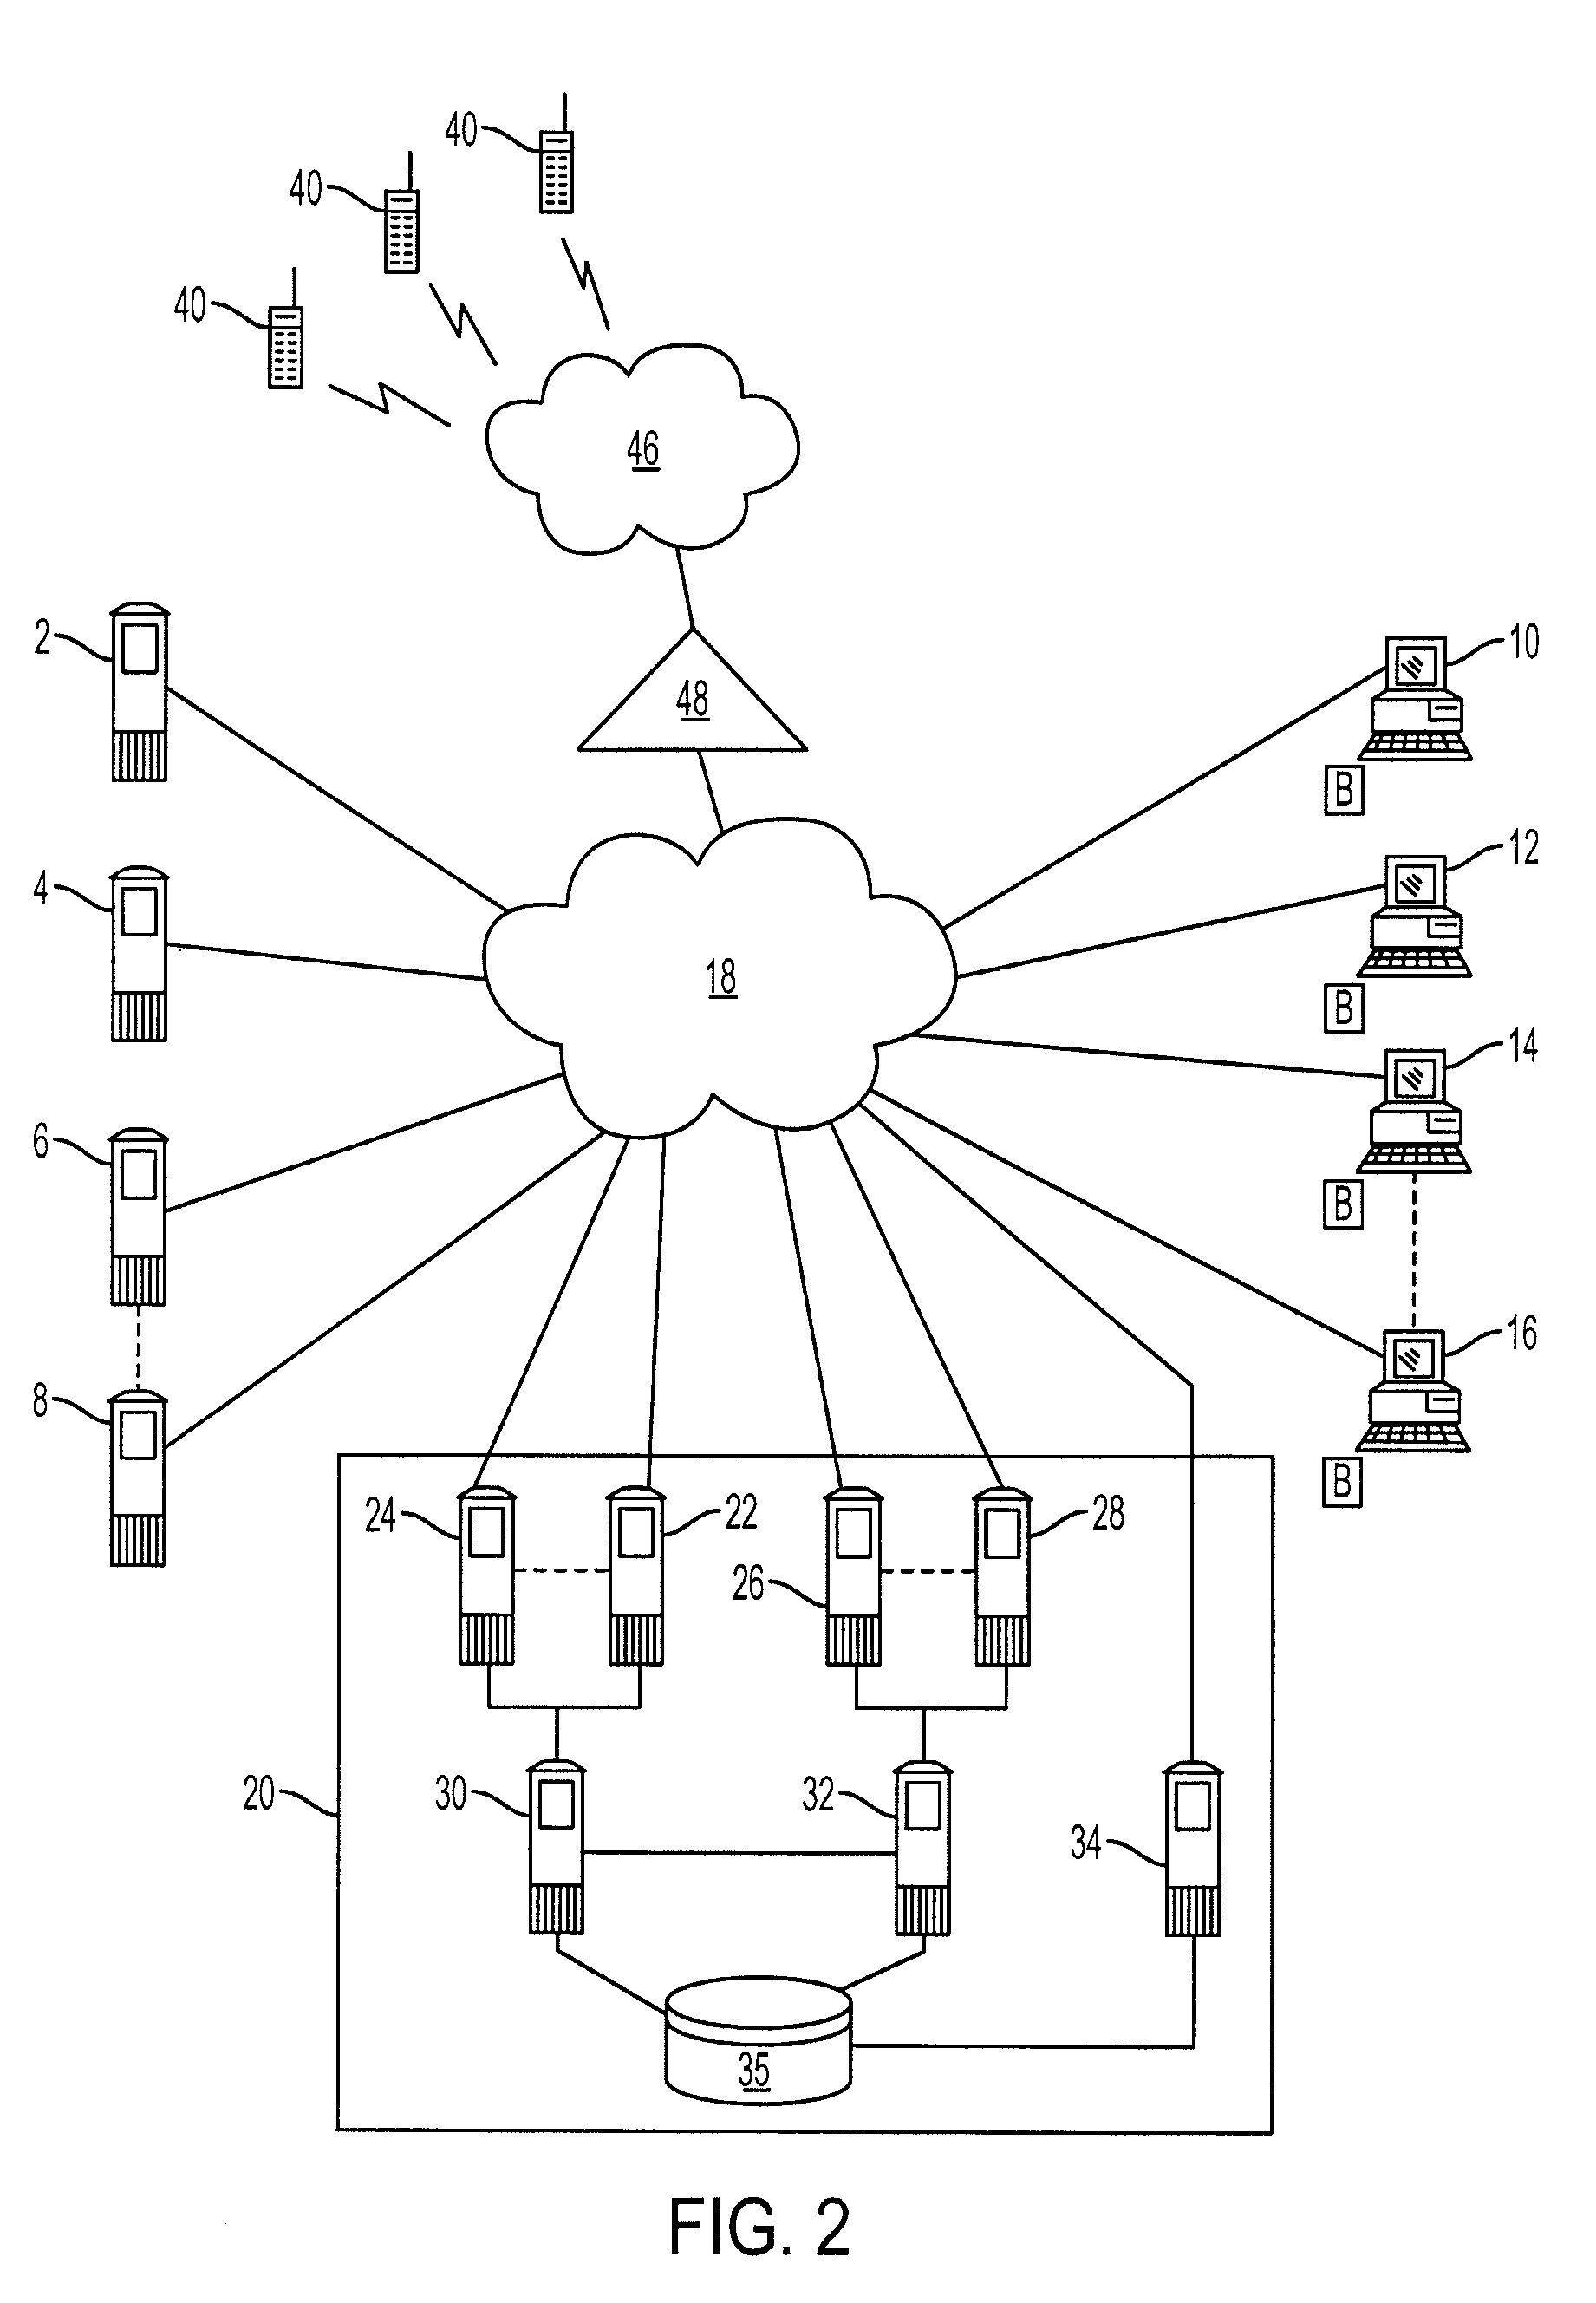 Network resource monitoring and measurement system and method